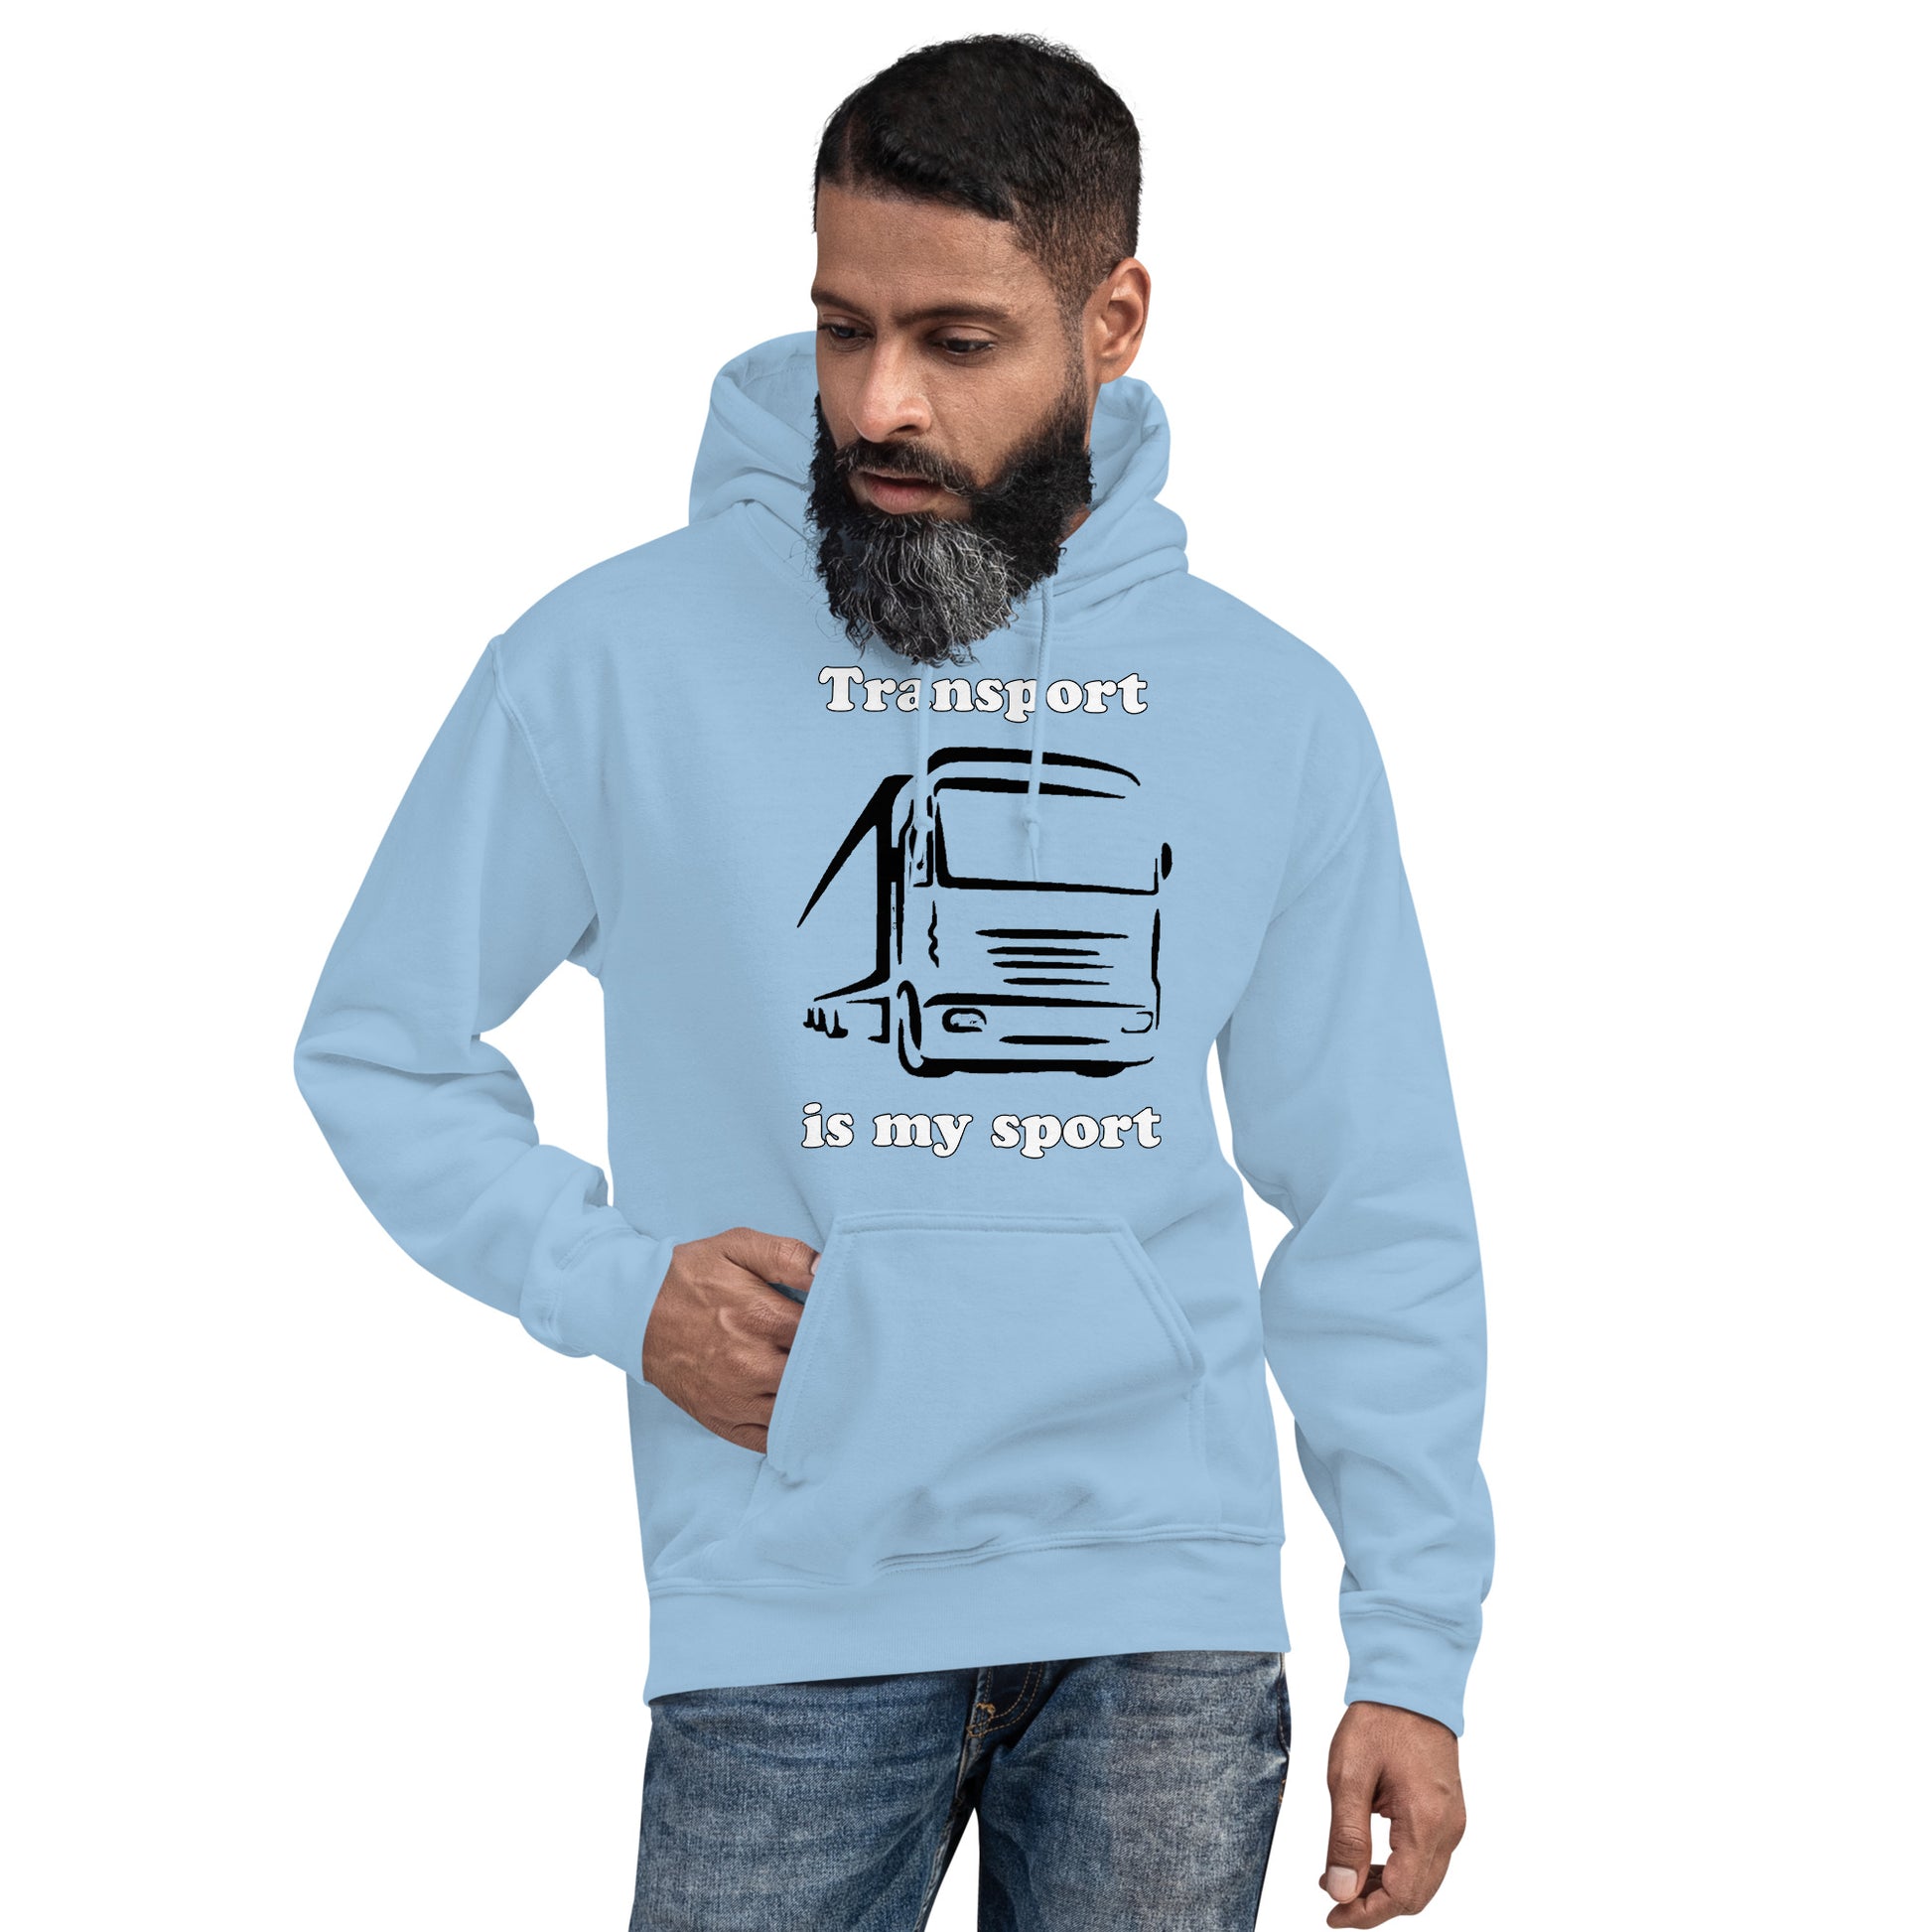 Man with sky blue hoodie with picture of truck and text "Transport is my sport"